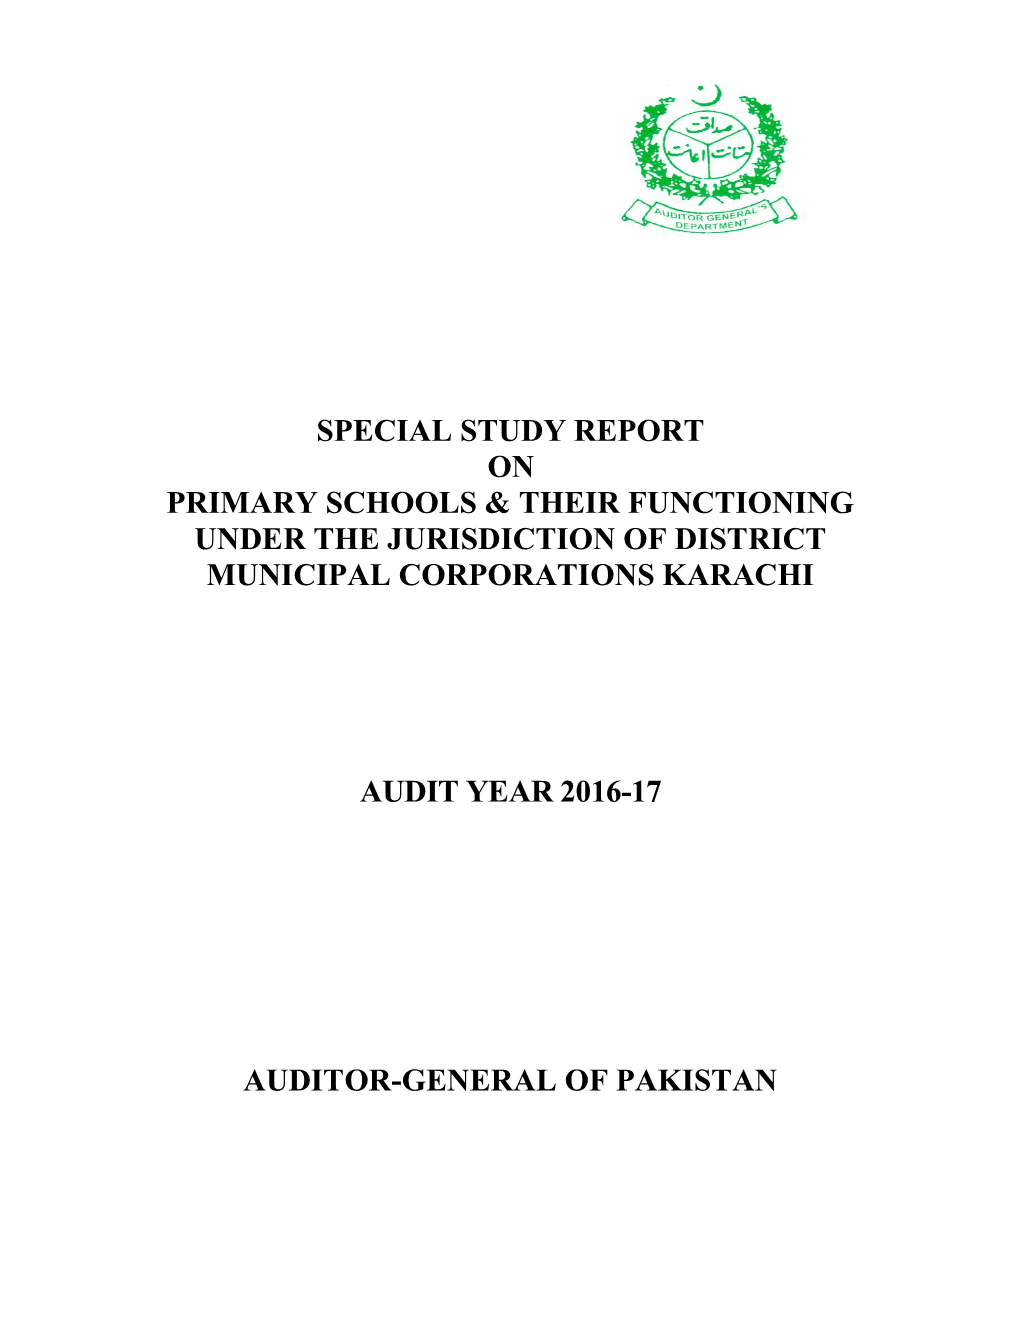 Special Study Report on Primary Schools & Their